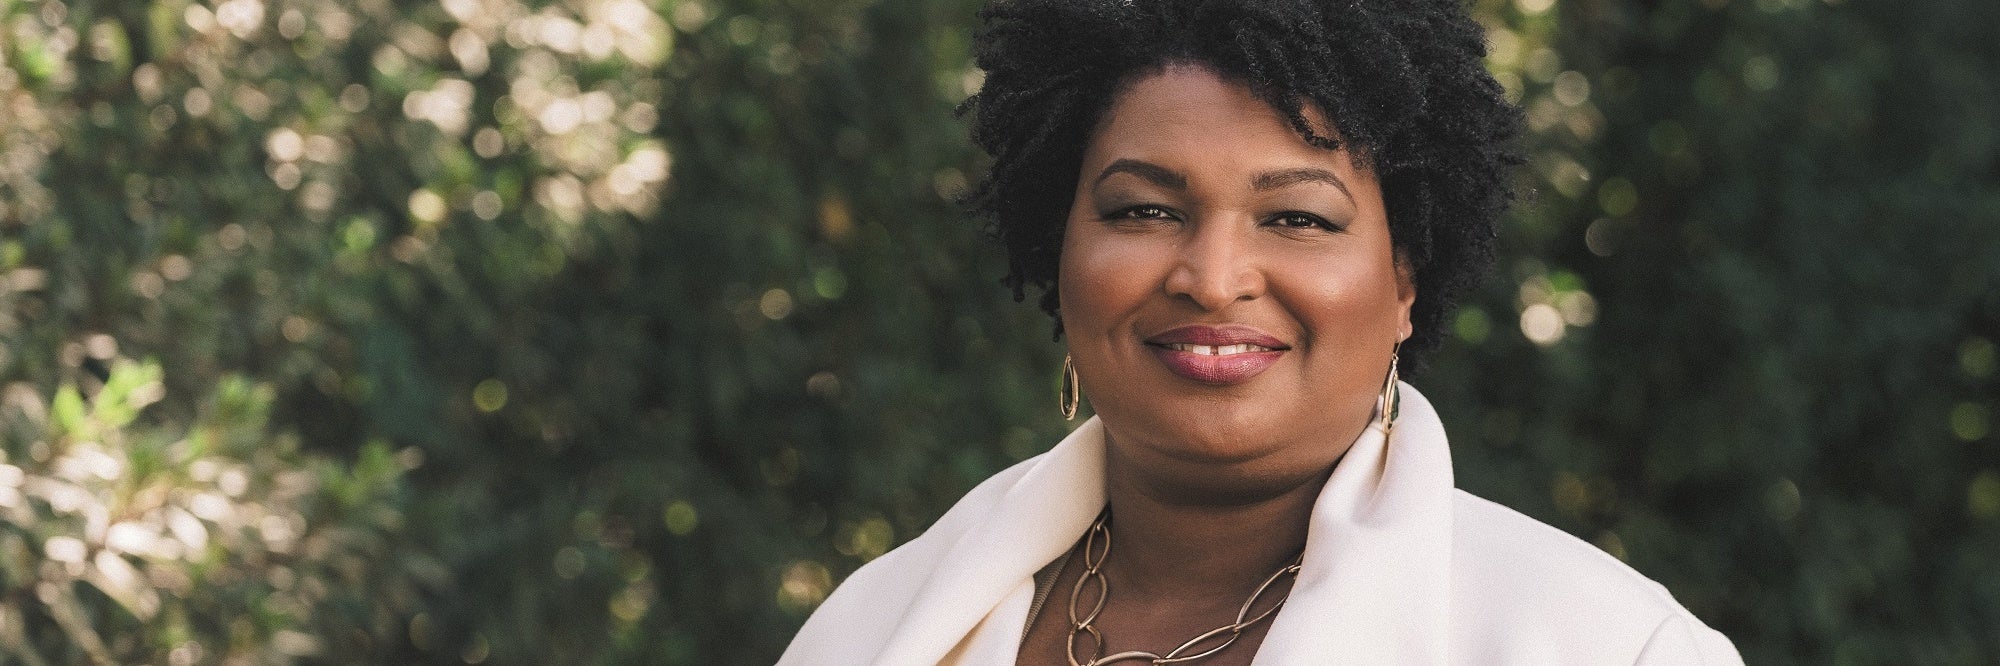 The Wait Is Over! Meet Stacey Abrams, Your New Favorite Author